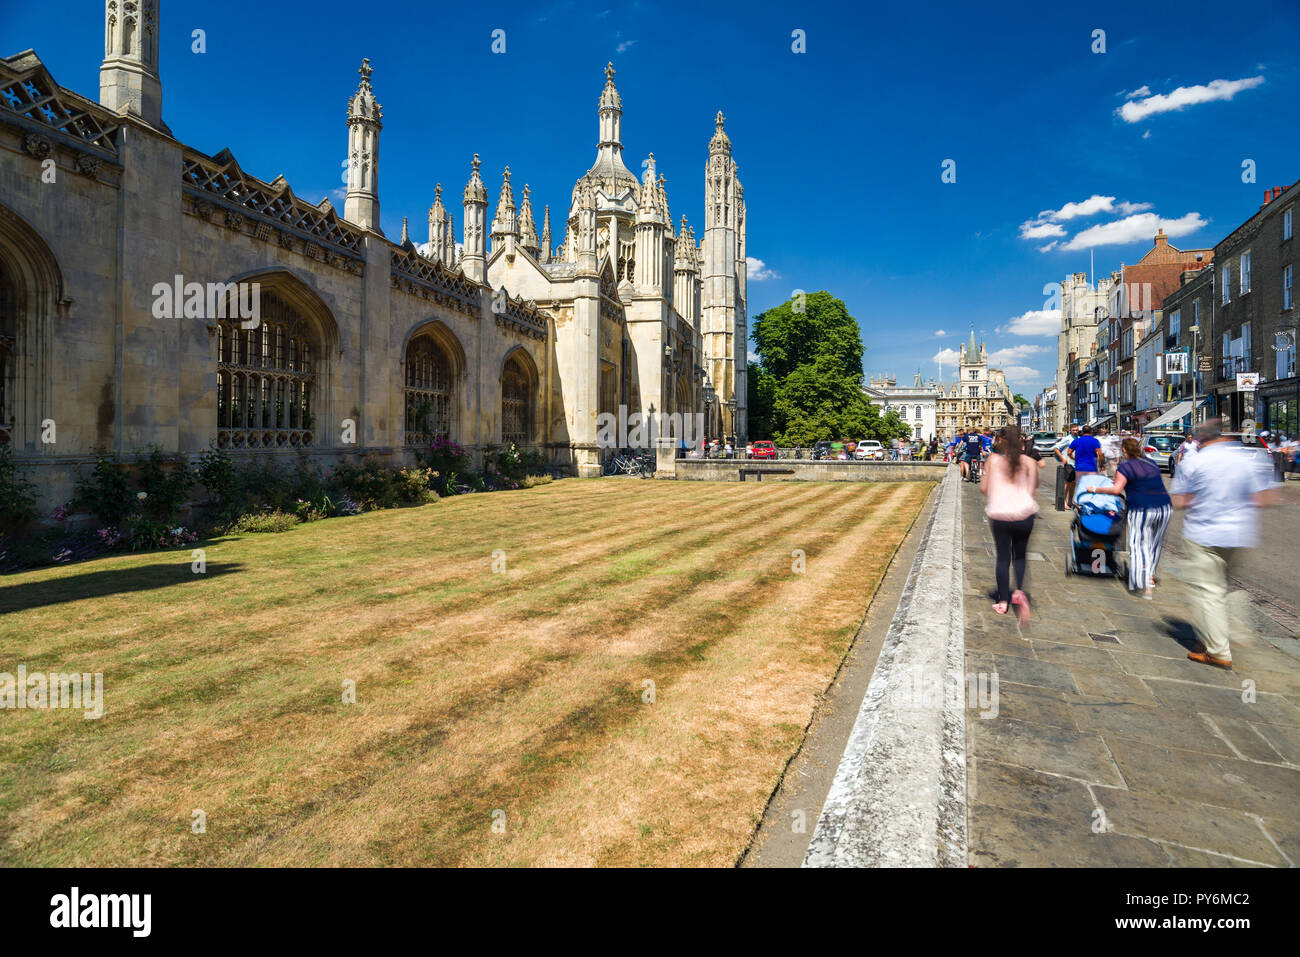 The exterior of Kings College with people outside on a sunny Summer afternoon, Cambridge, UK Stock Photo